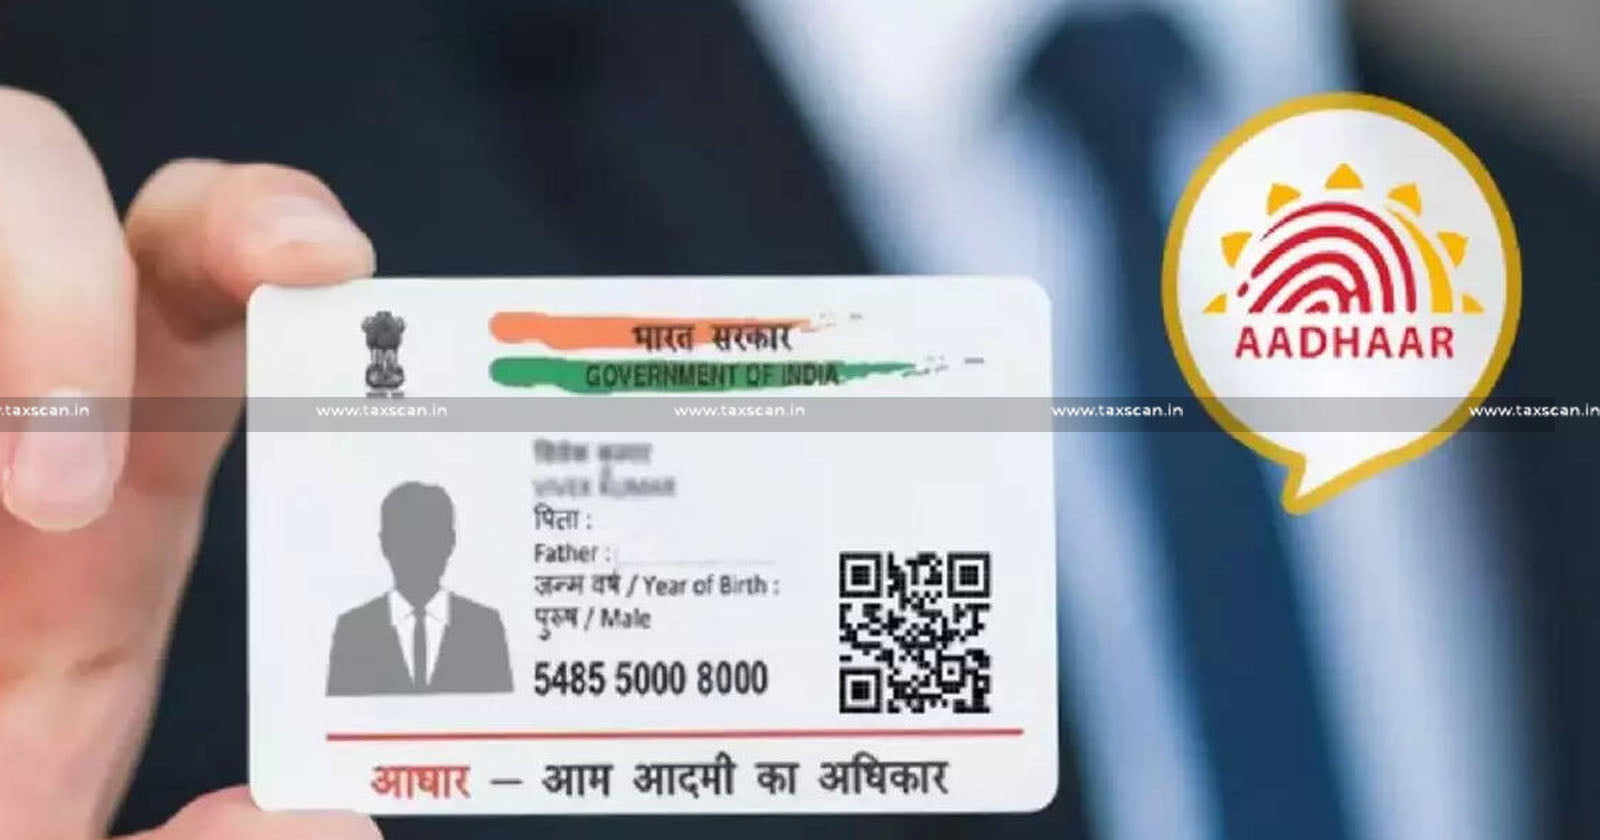 Central Govt notifies Authorization of - MSMEs to perform Aadhar Authentication - TAXSCAN